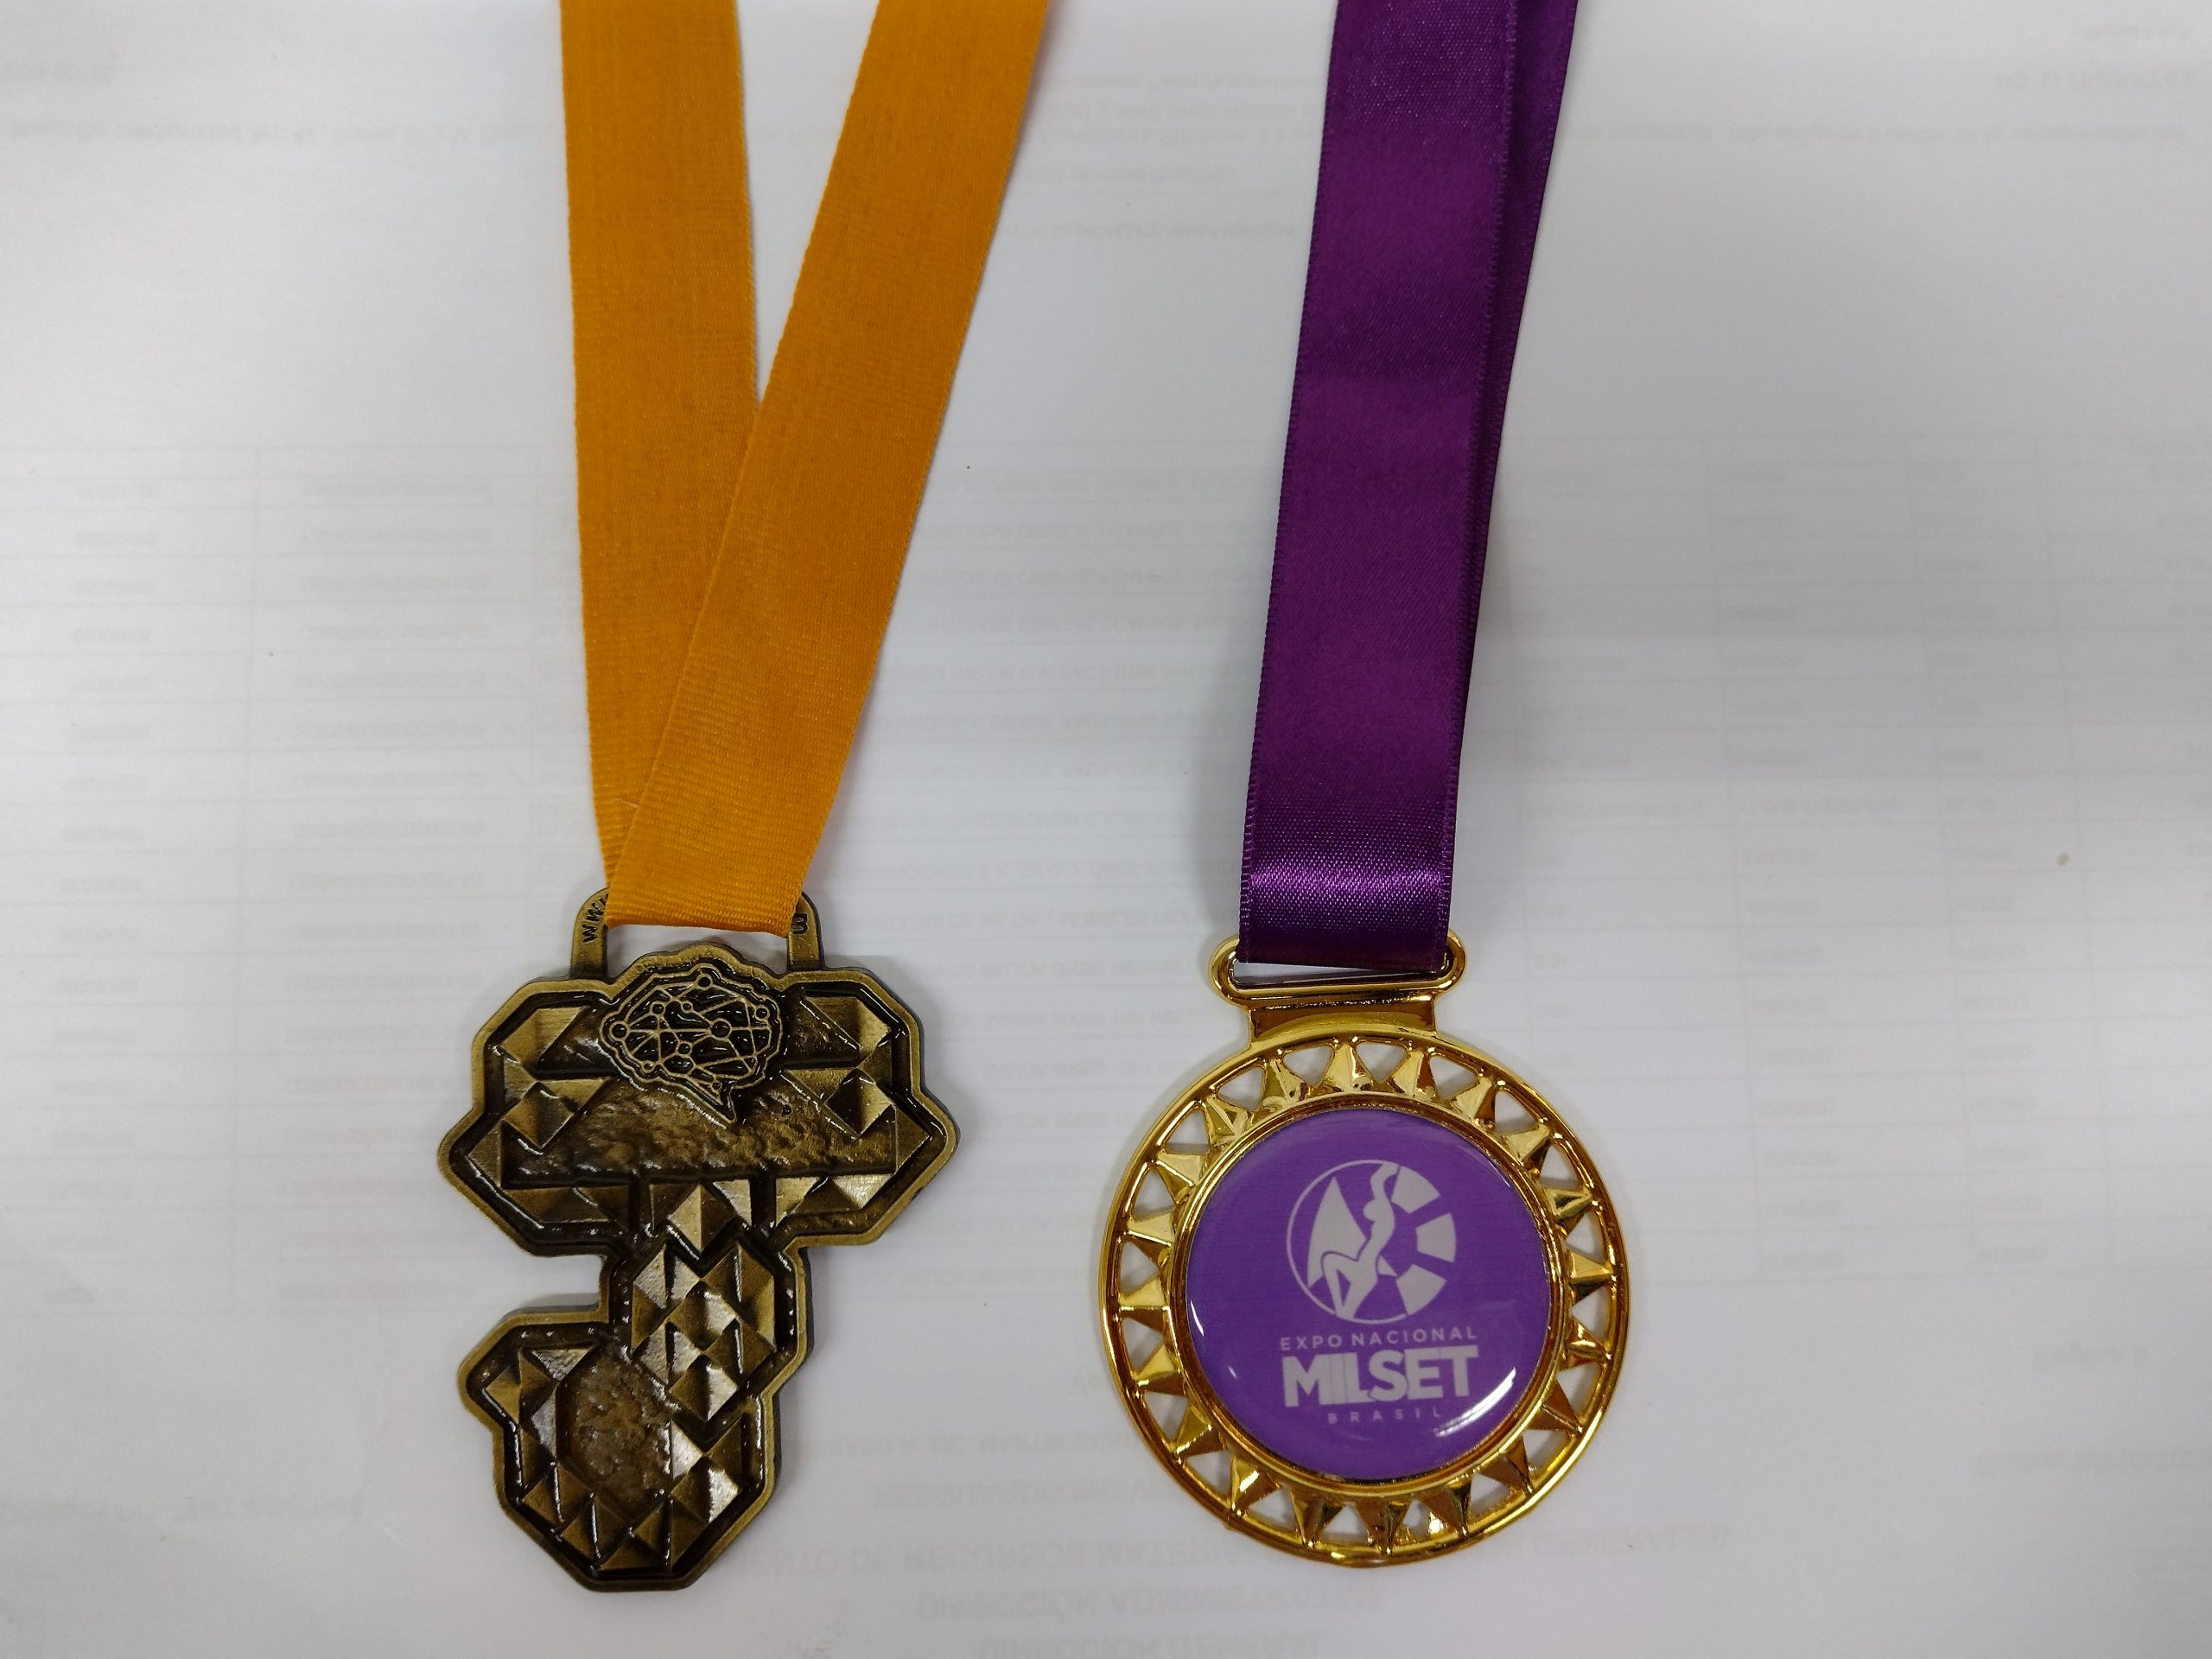 The medals won by the mangrove project